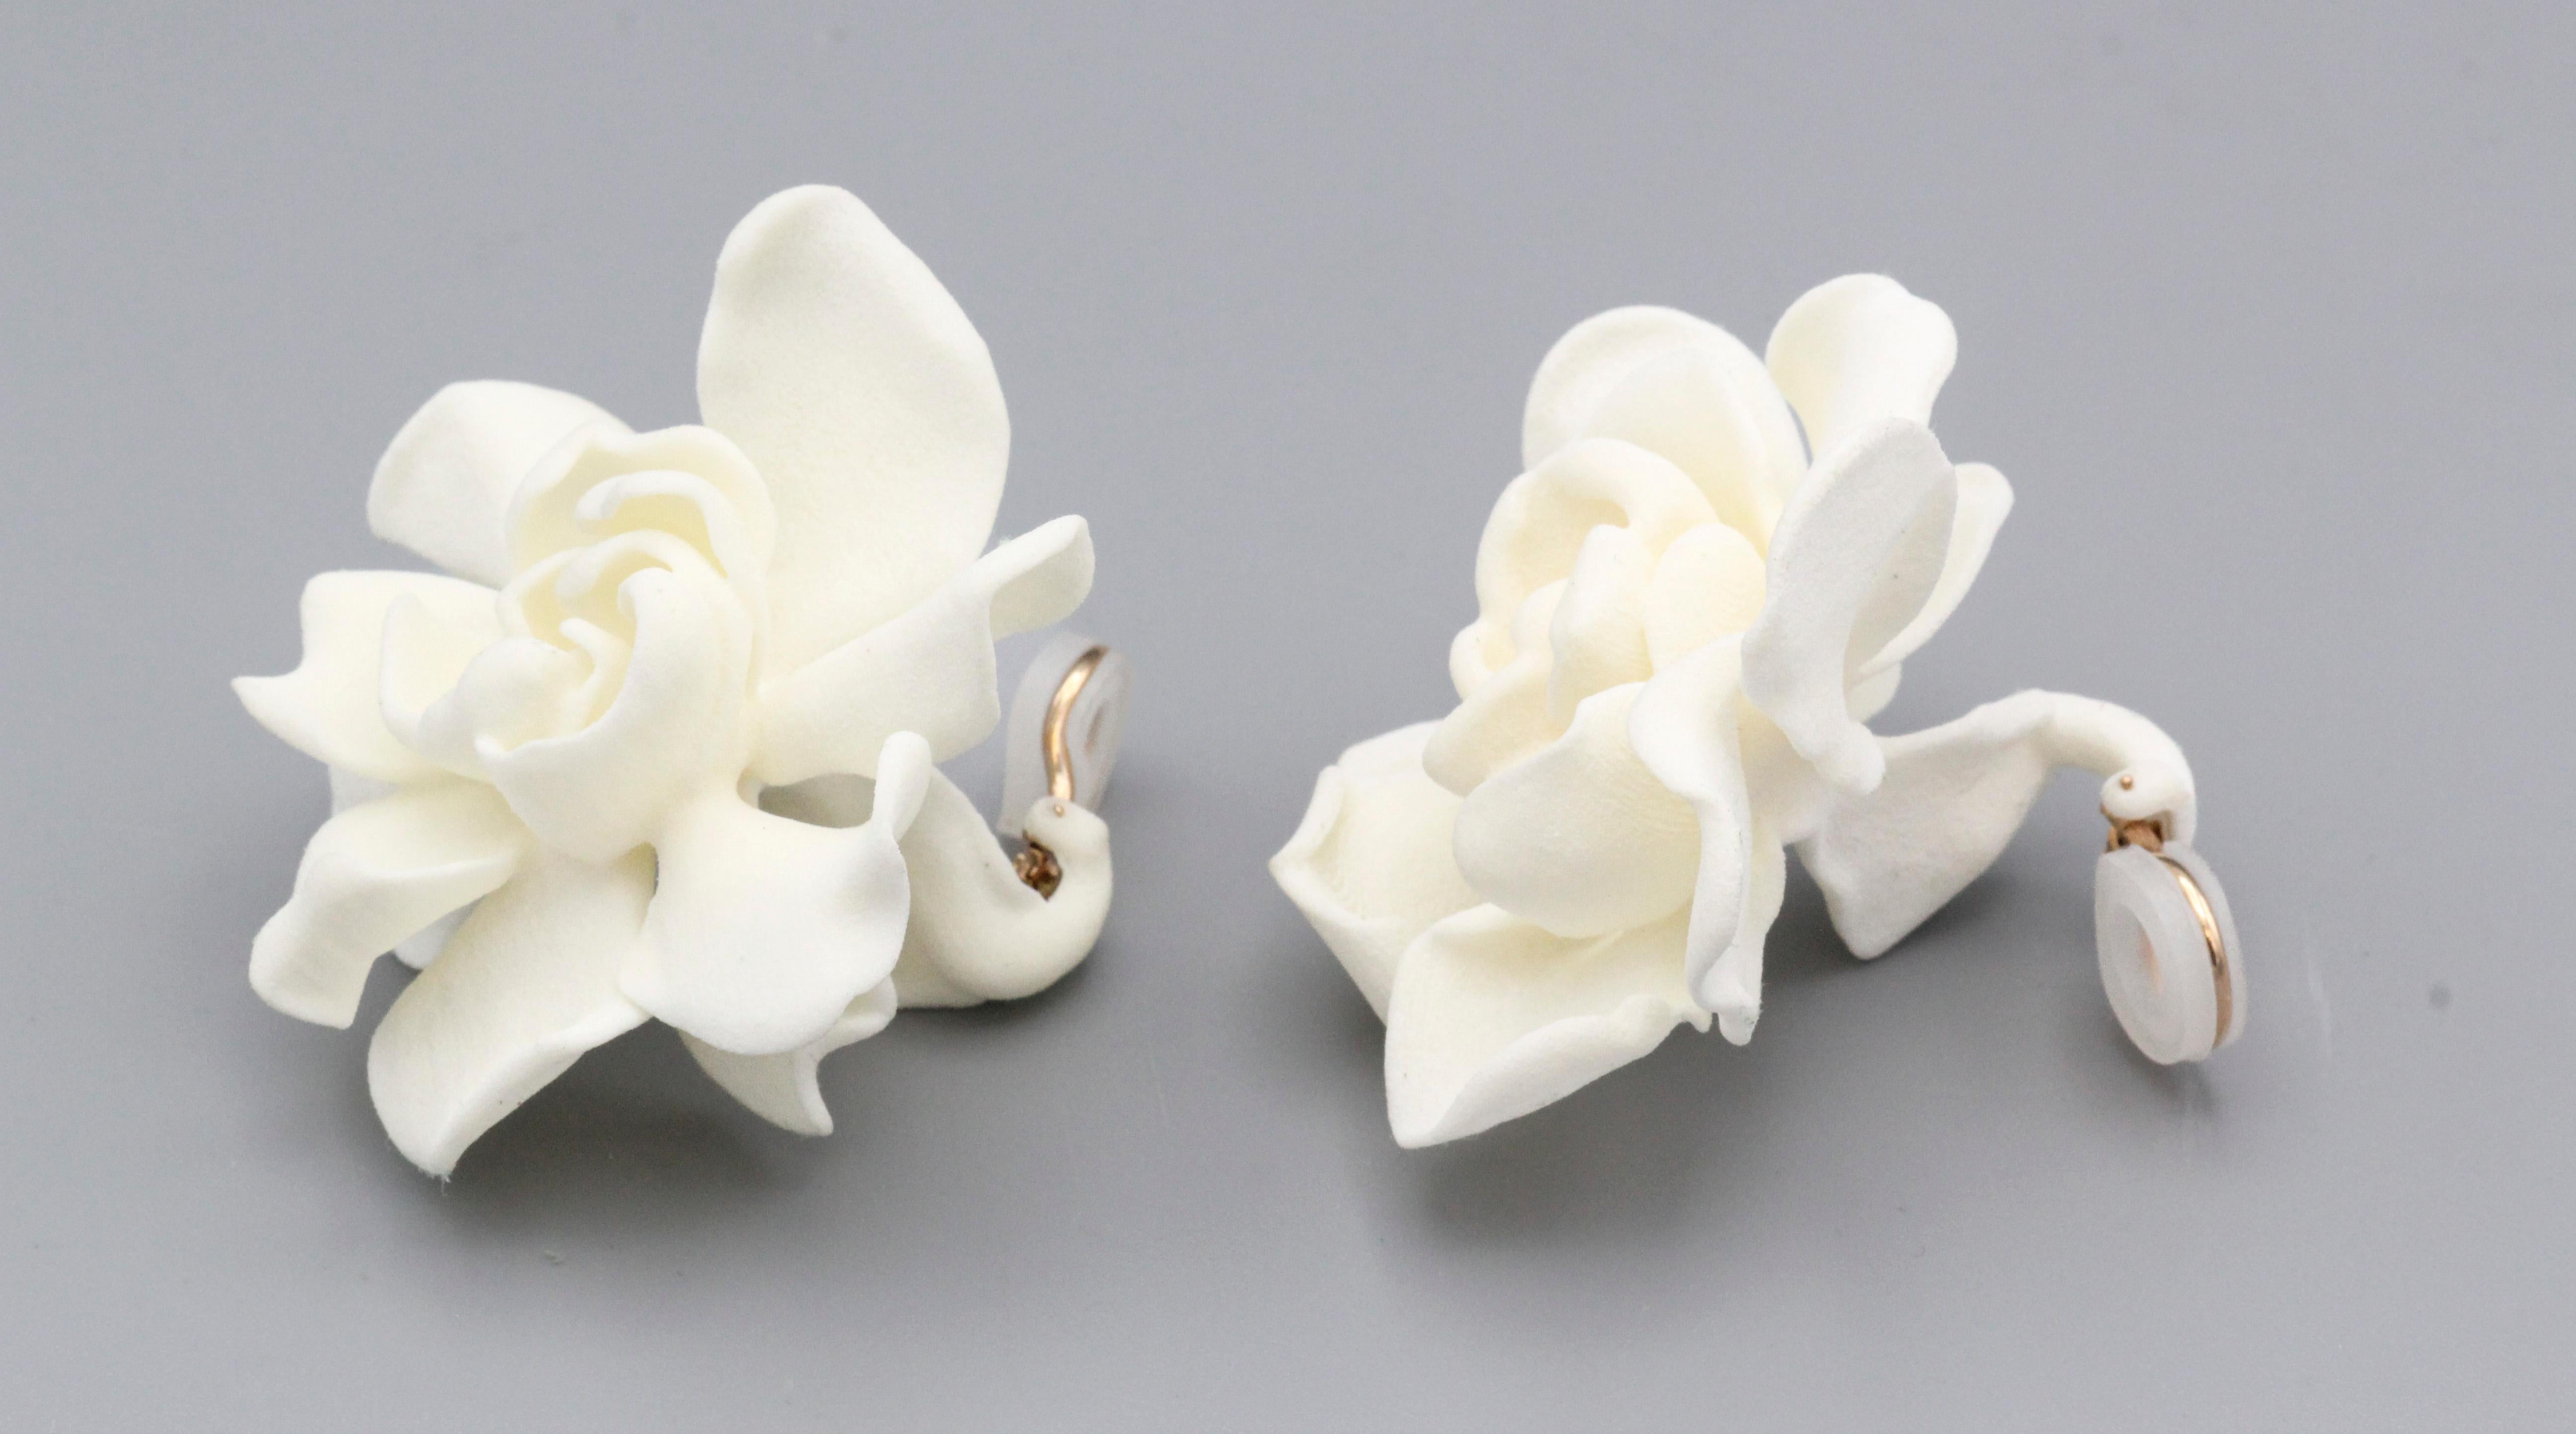 Enchanting Elegance: JAR Large White Gardenia Earrings

Embrace the captivating beauty of nature with these exquisite JAR Large White Gardenia Earrings. Crafted by the legendary Parisian jeweler Joel Arthur Rosenthal, these earrings are more than